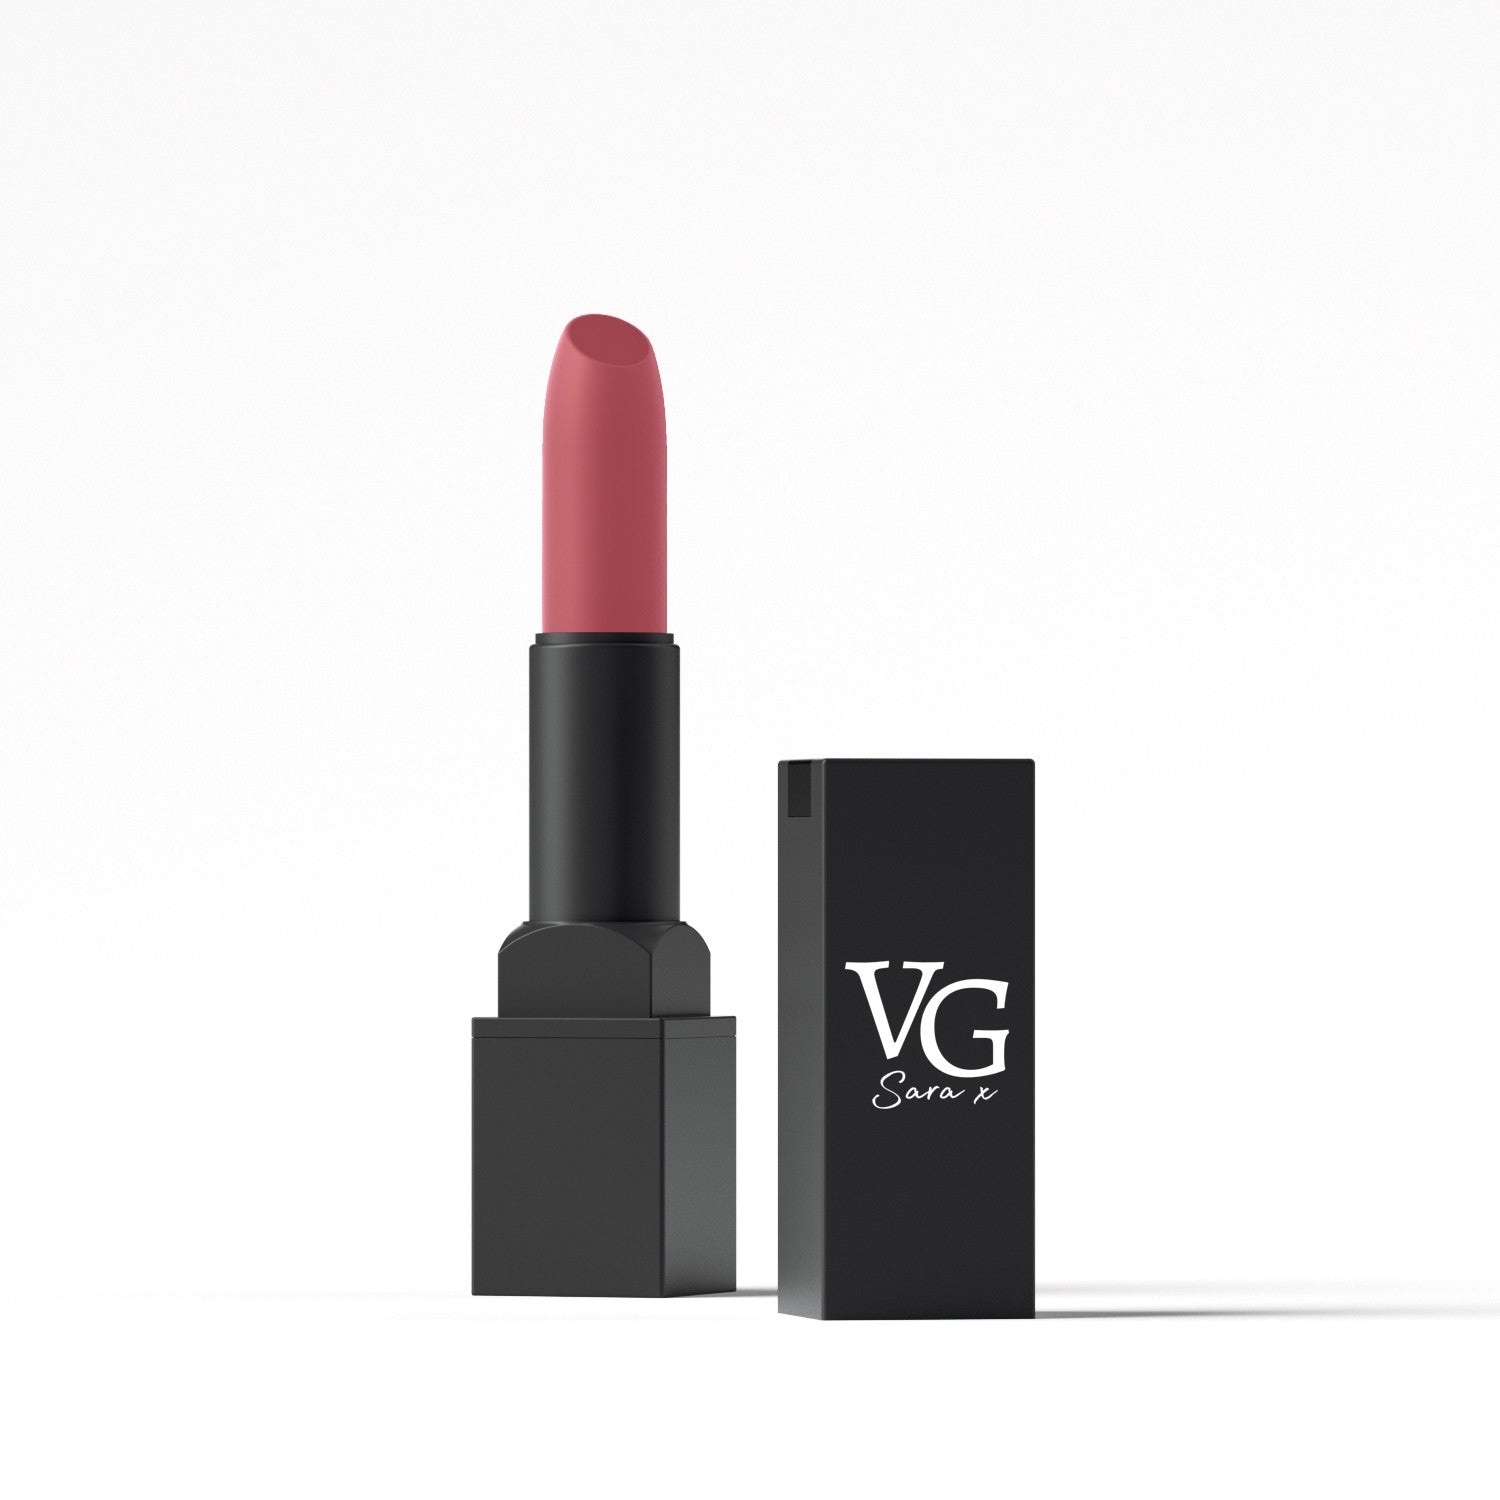 Detailed view of VG Cosmetics lipstick with original brand imprint